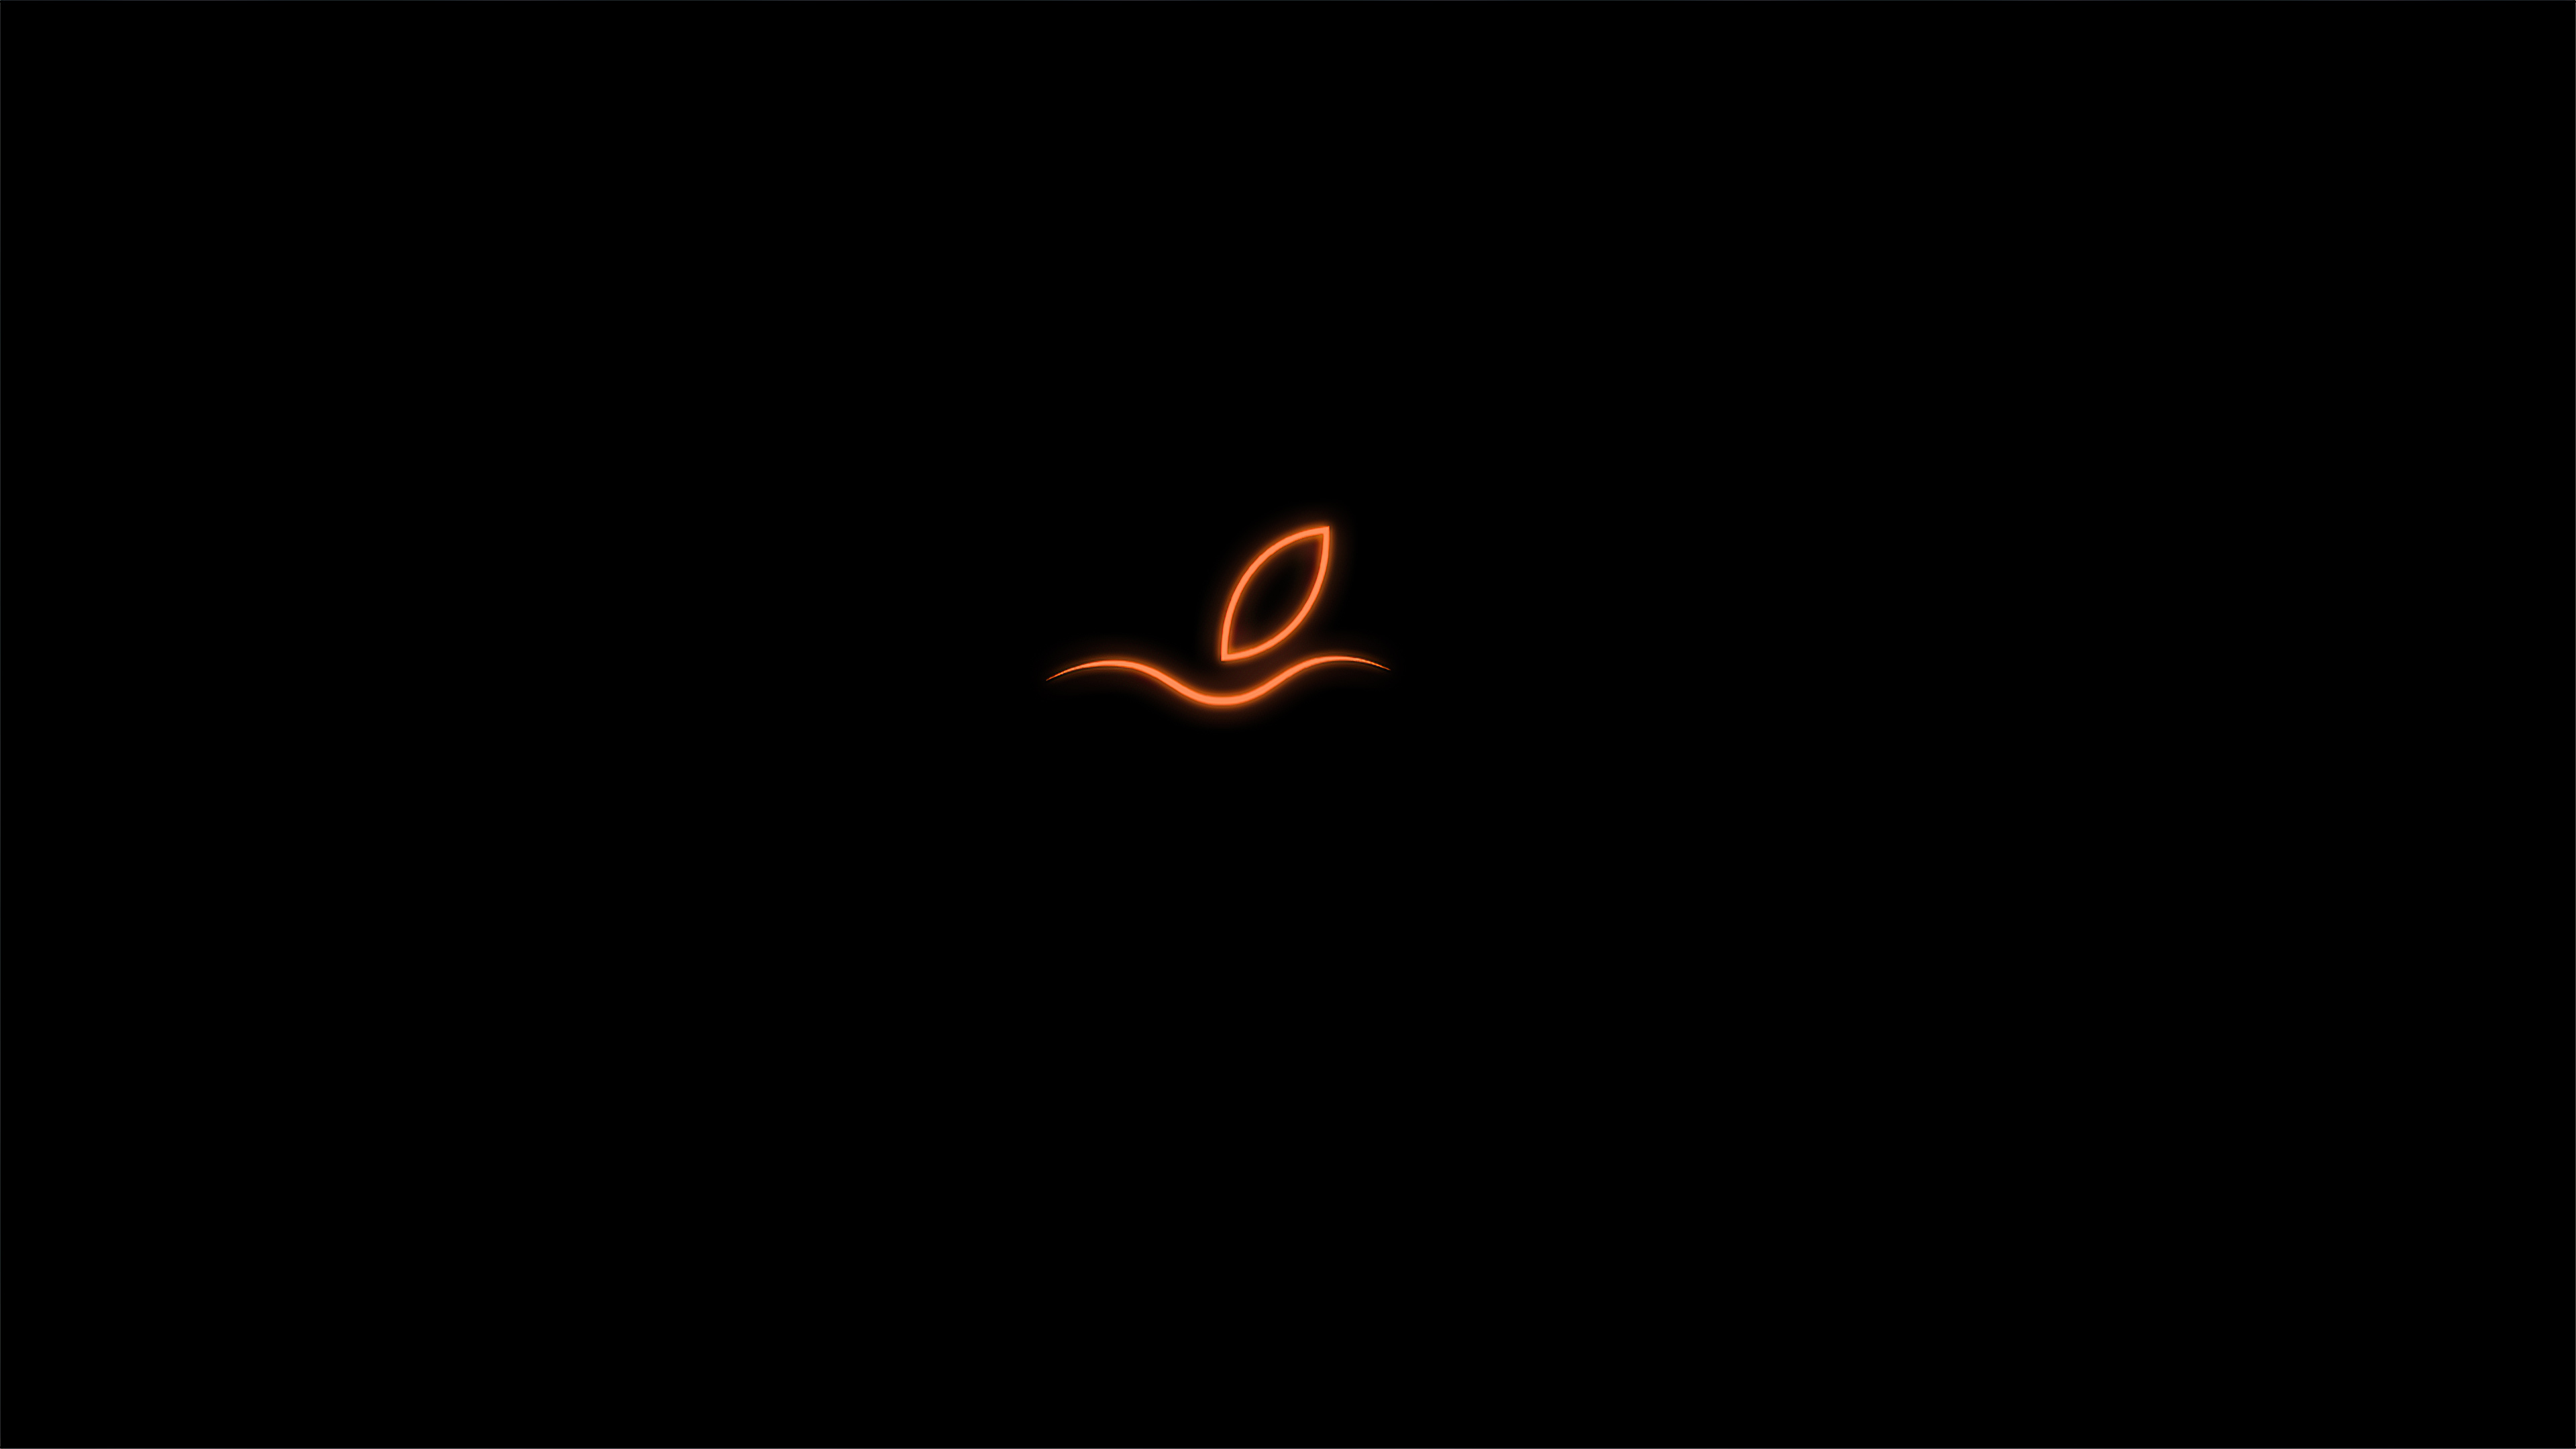 2932x2932 Glowing Apple Logo 4k Ipad Pro Retina Display HD 4k Wallpapers,  Images, Backgrounds, Photos and Pictures